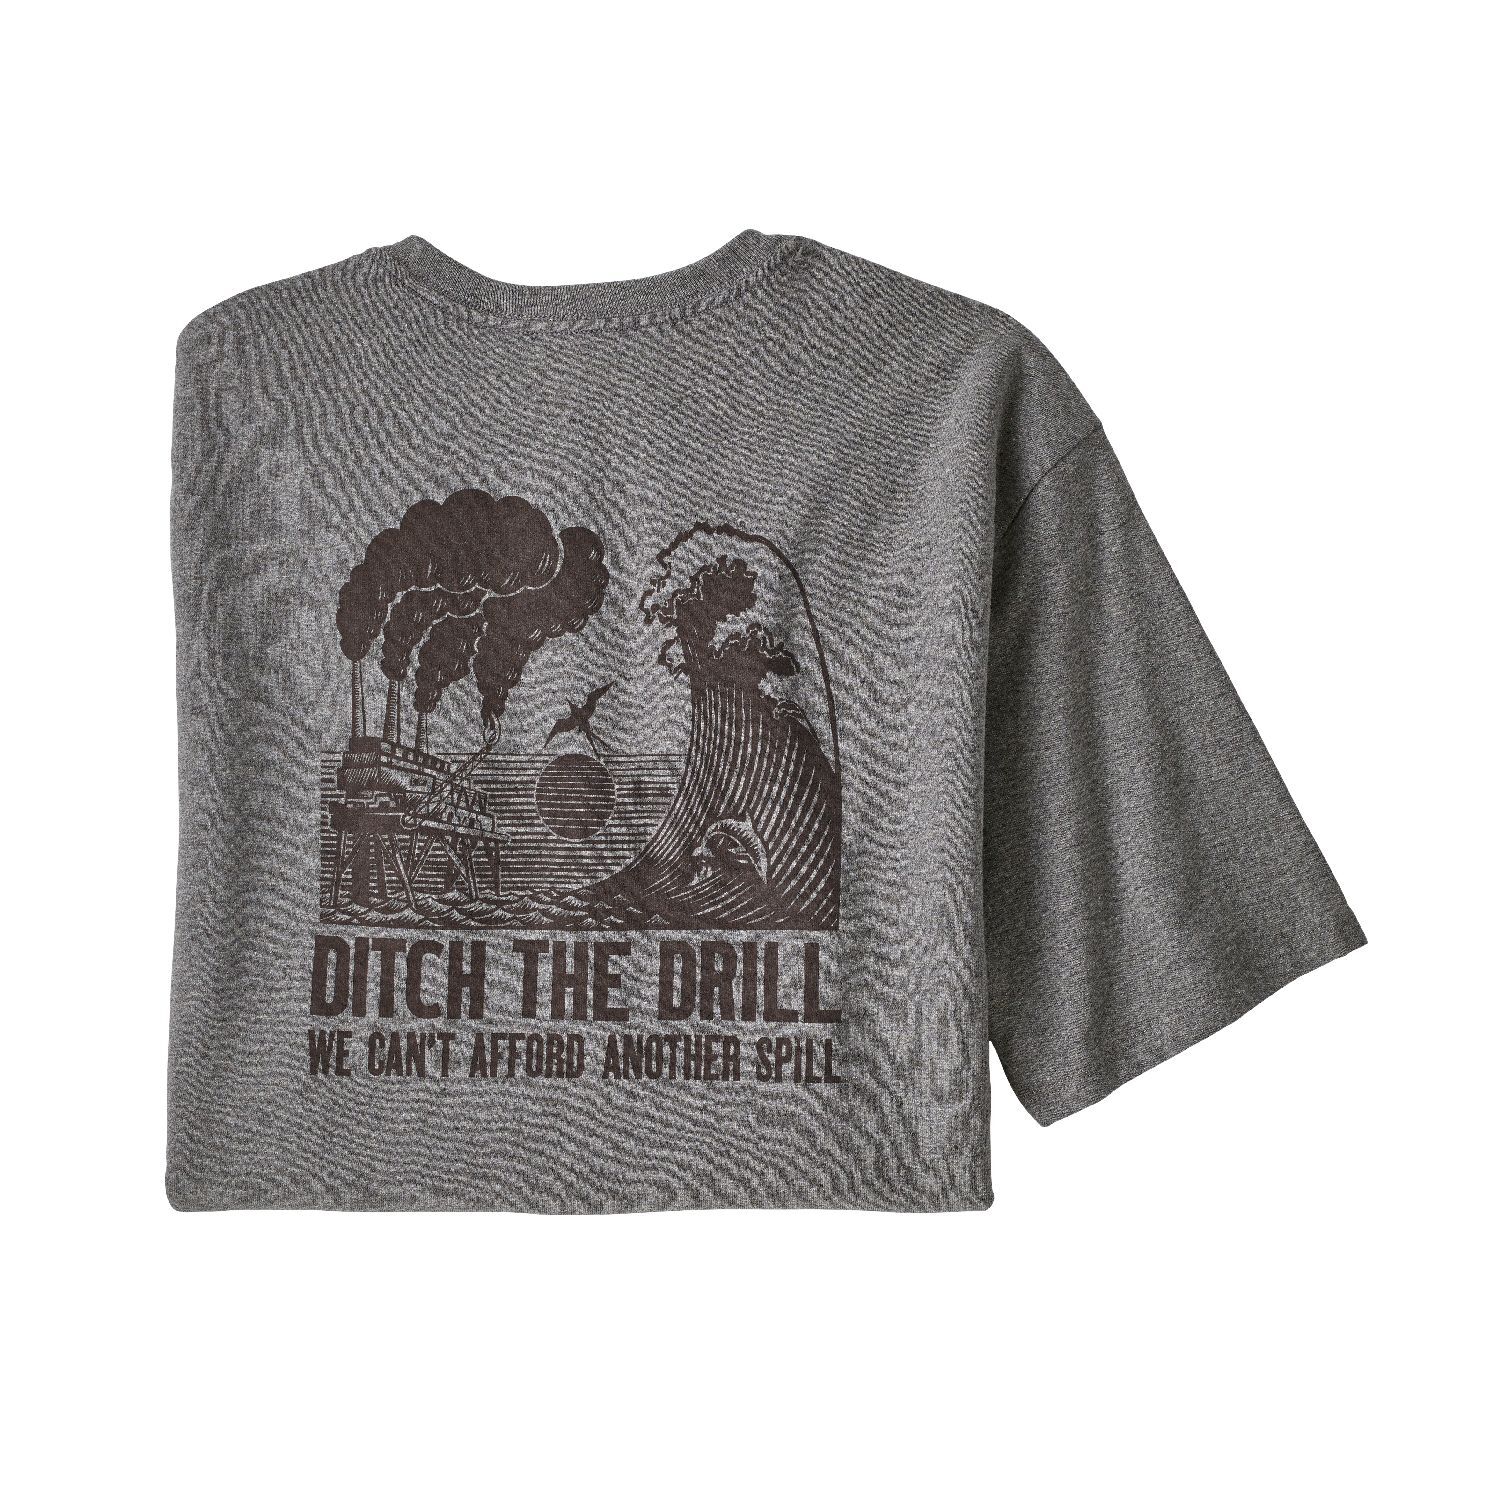 Patagonia Ditch The Drill Responsibili-Tee - T-shirt - Heren